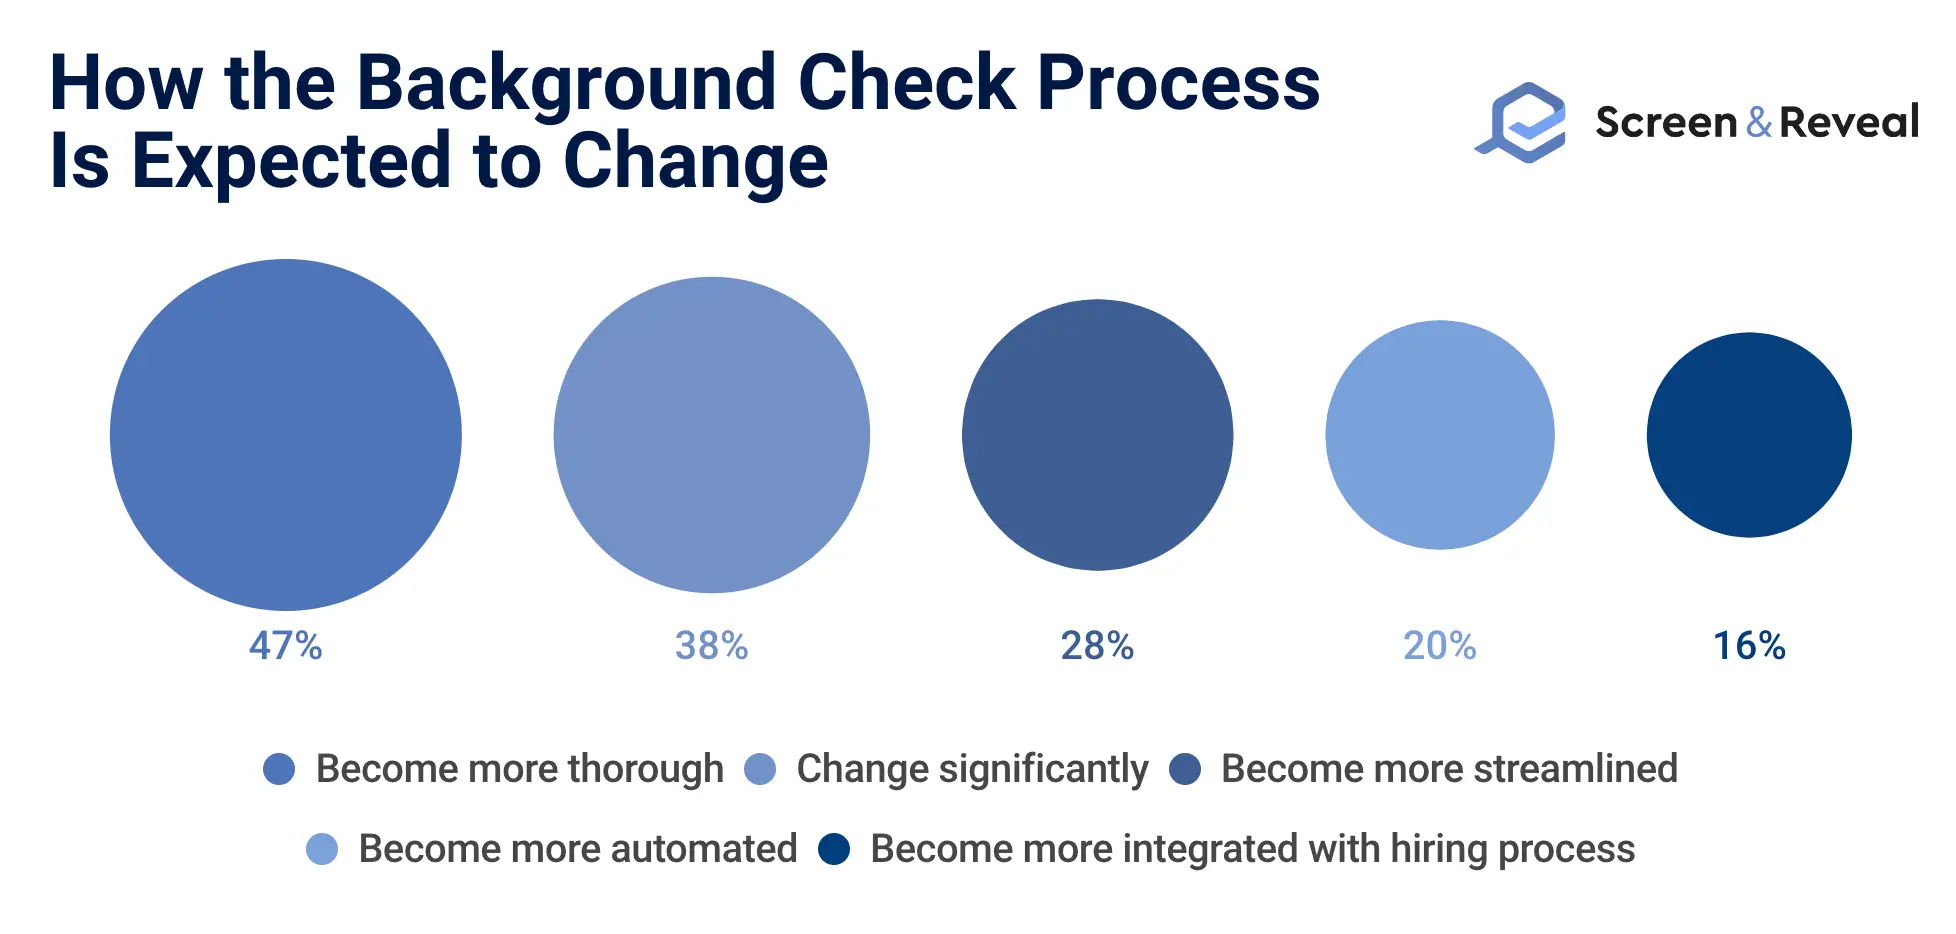 How the Background Check Process Is Expected to Change